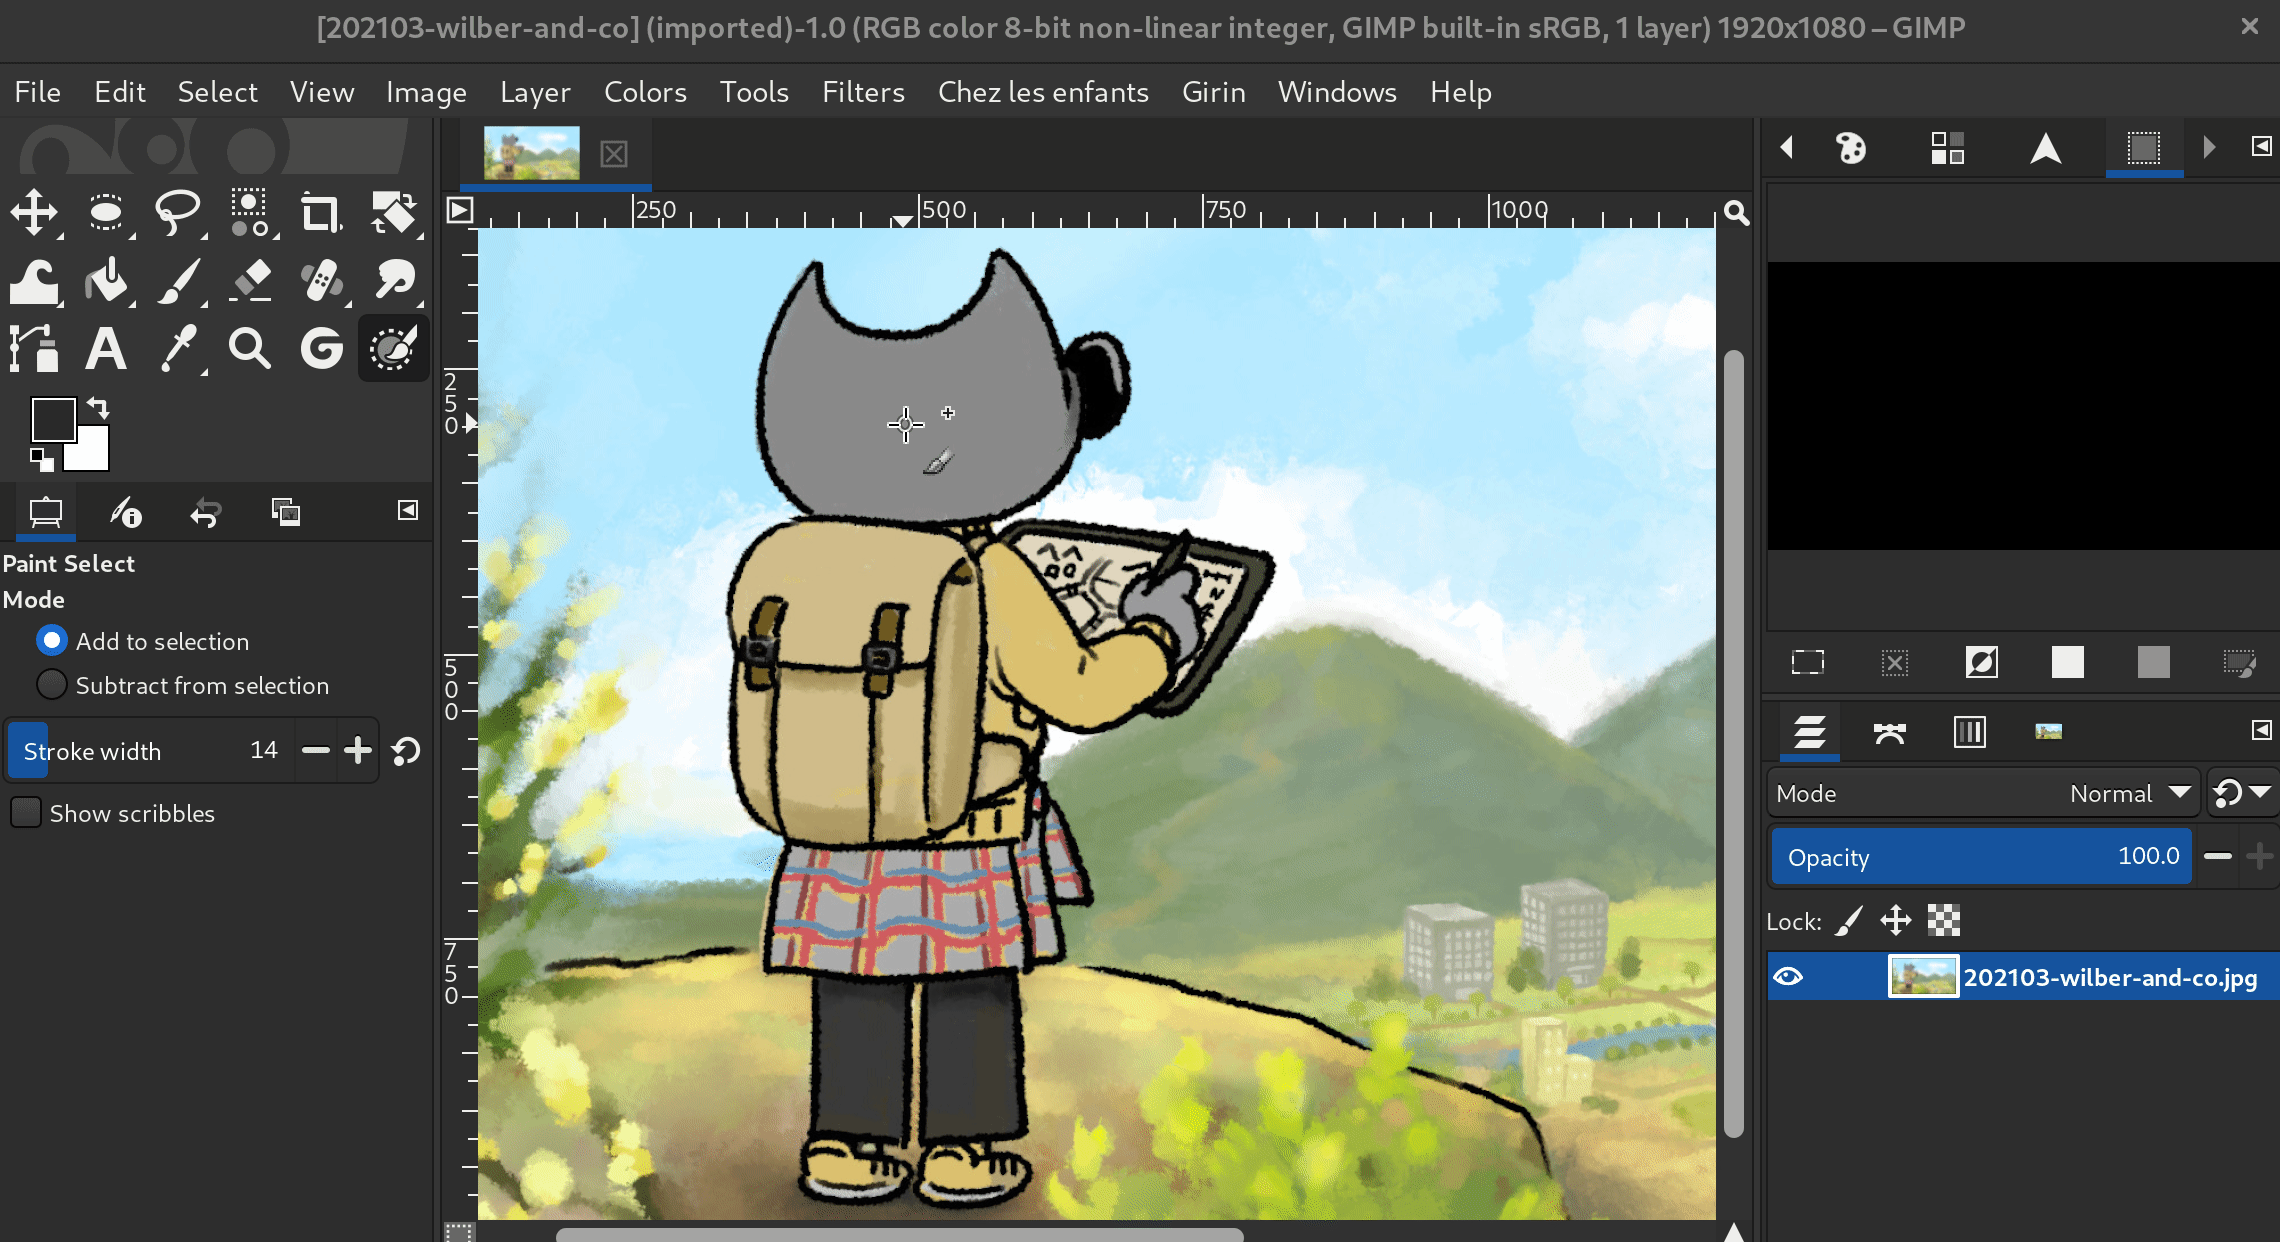 Copy-pasting Wilber in a few seconds with the Paint Select tool (realtime GIF) - GIMP 2.99.6